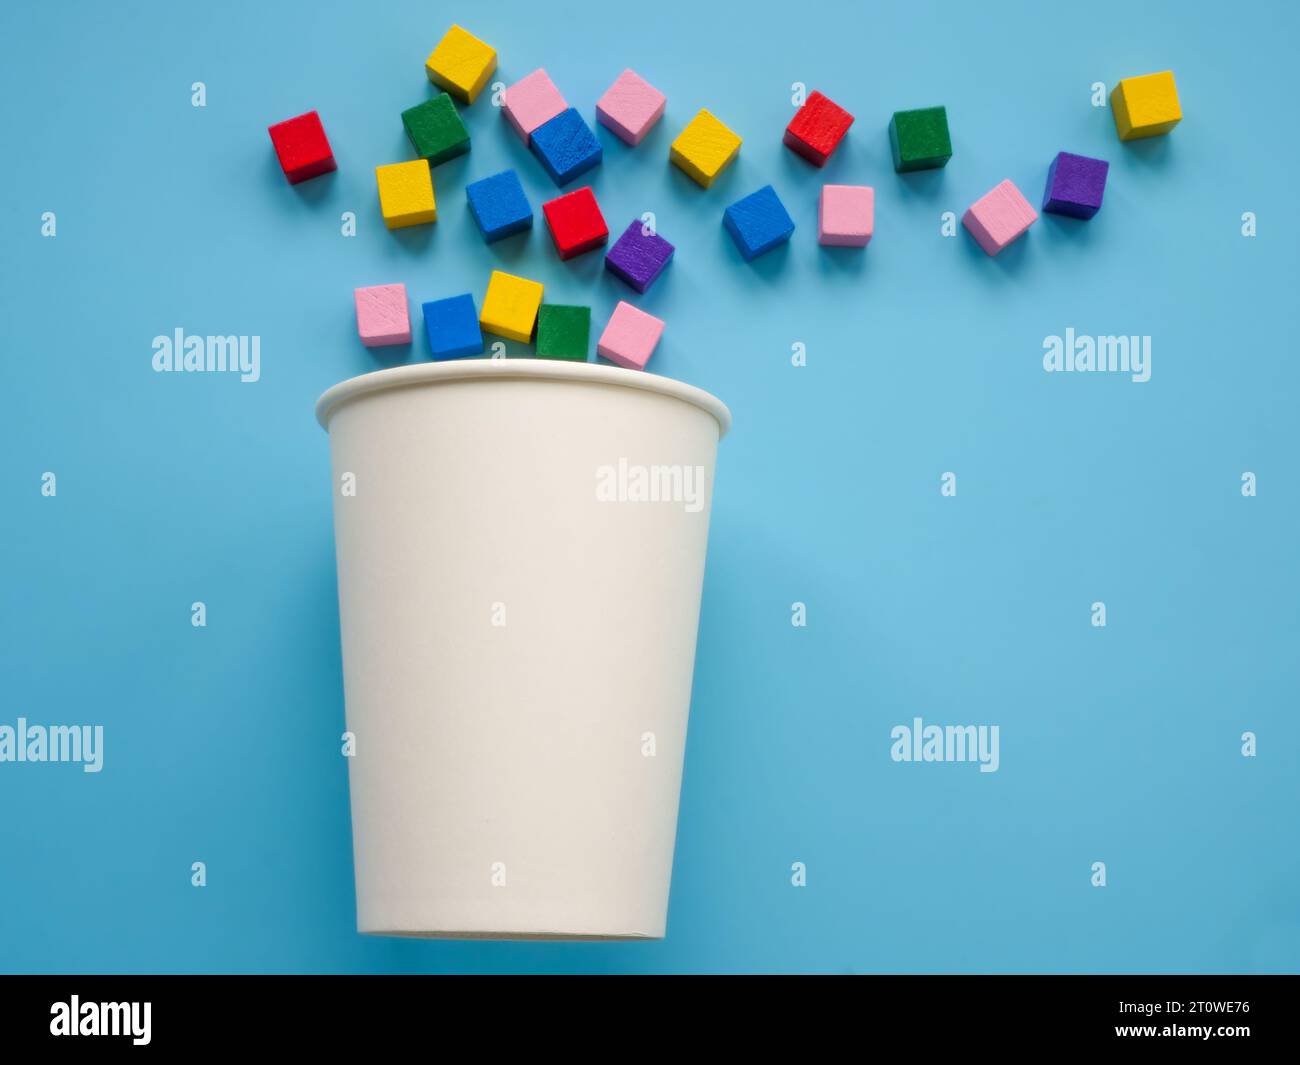 A paper cup and colorful cubes as a symbol of positivity and creativity. Minimal. Modern trendy art. Stock Photo